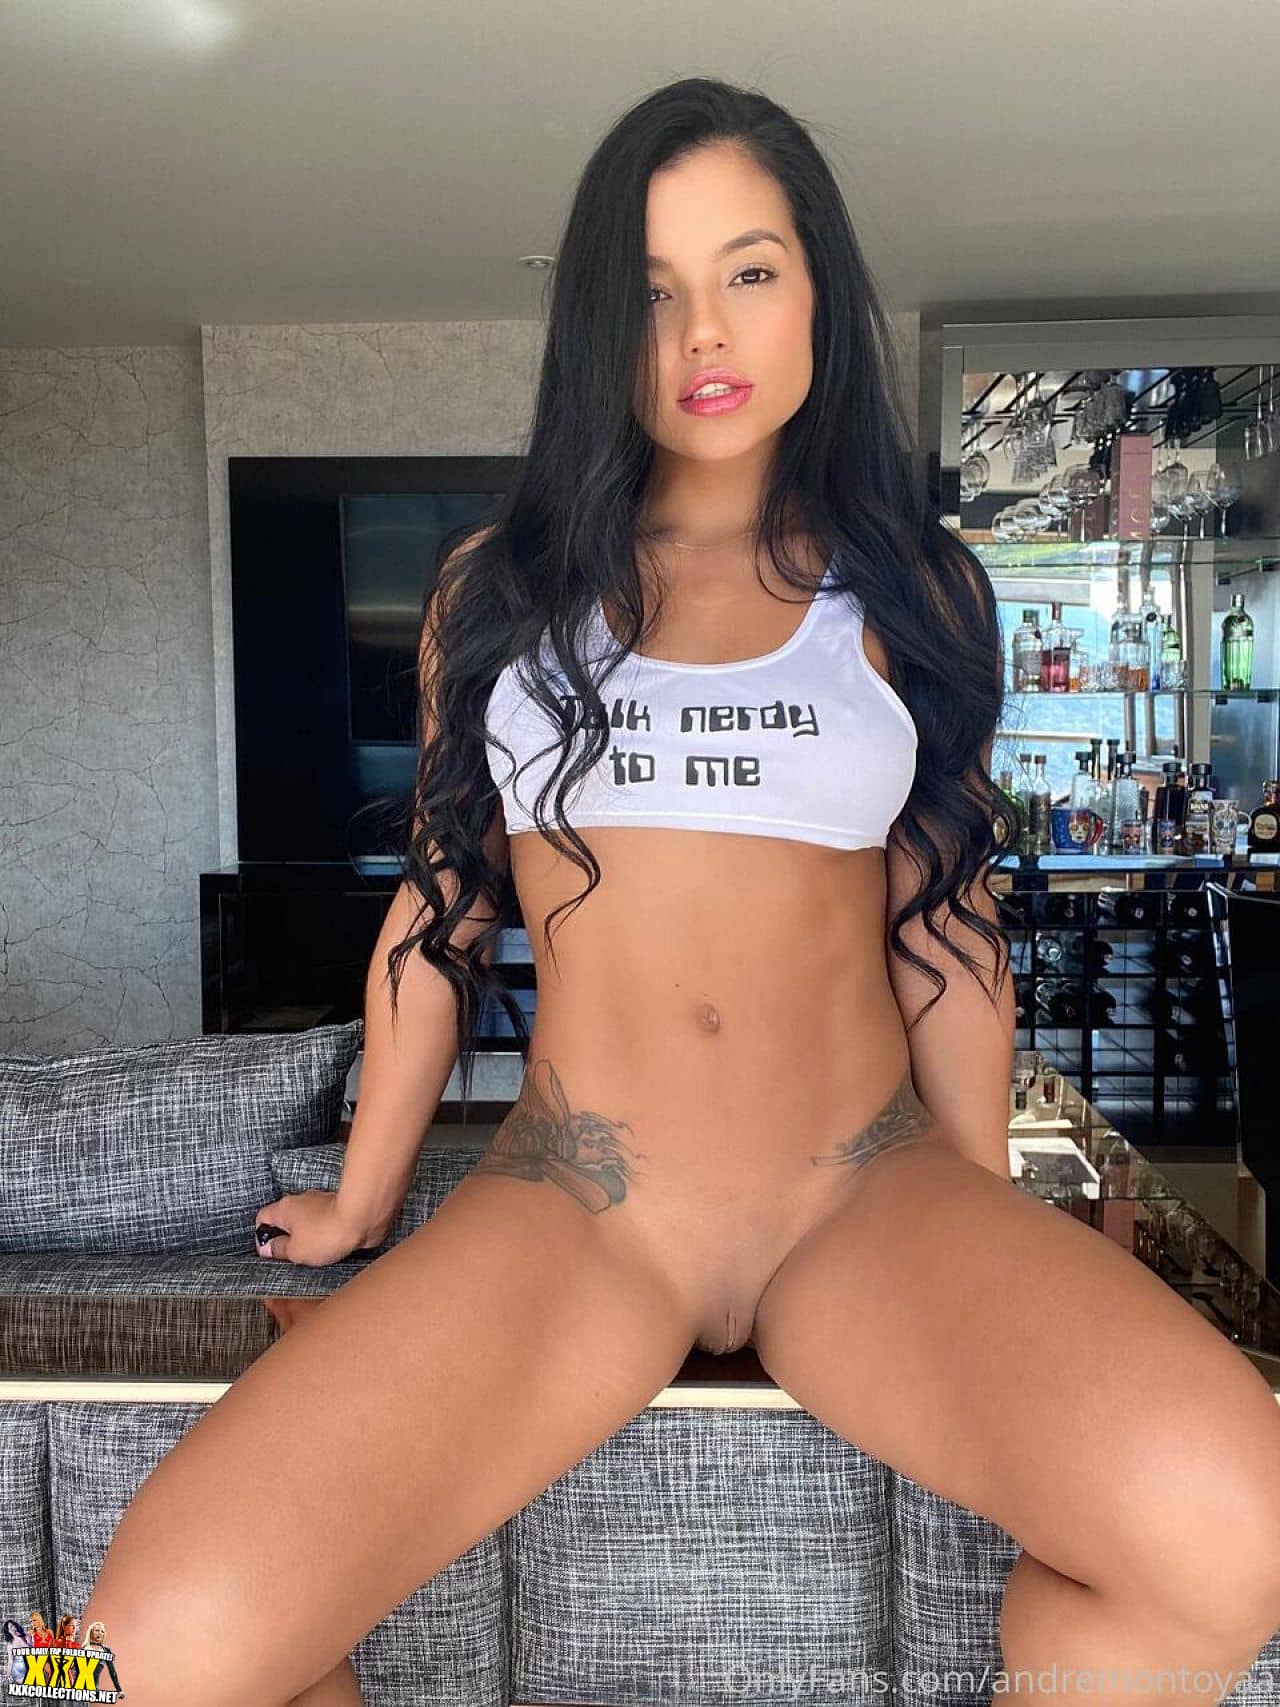 Andrearhodea onlyfans